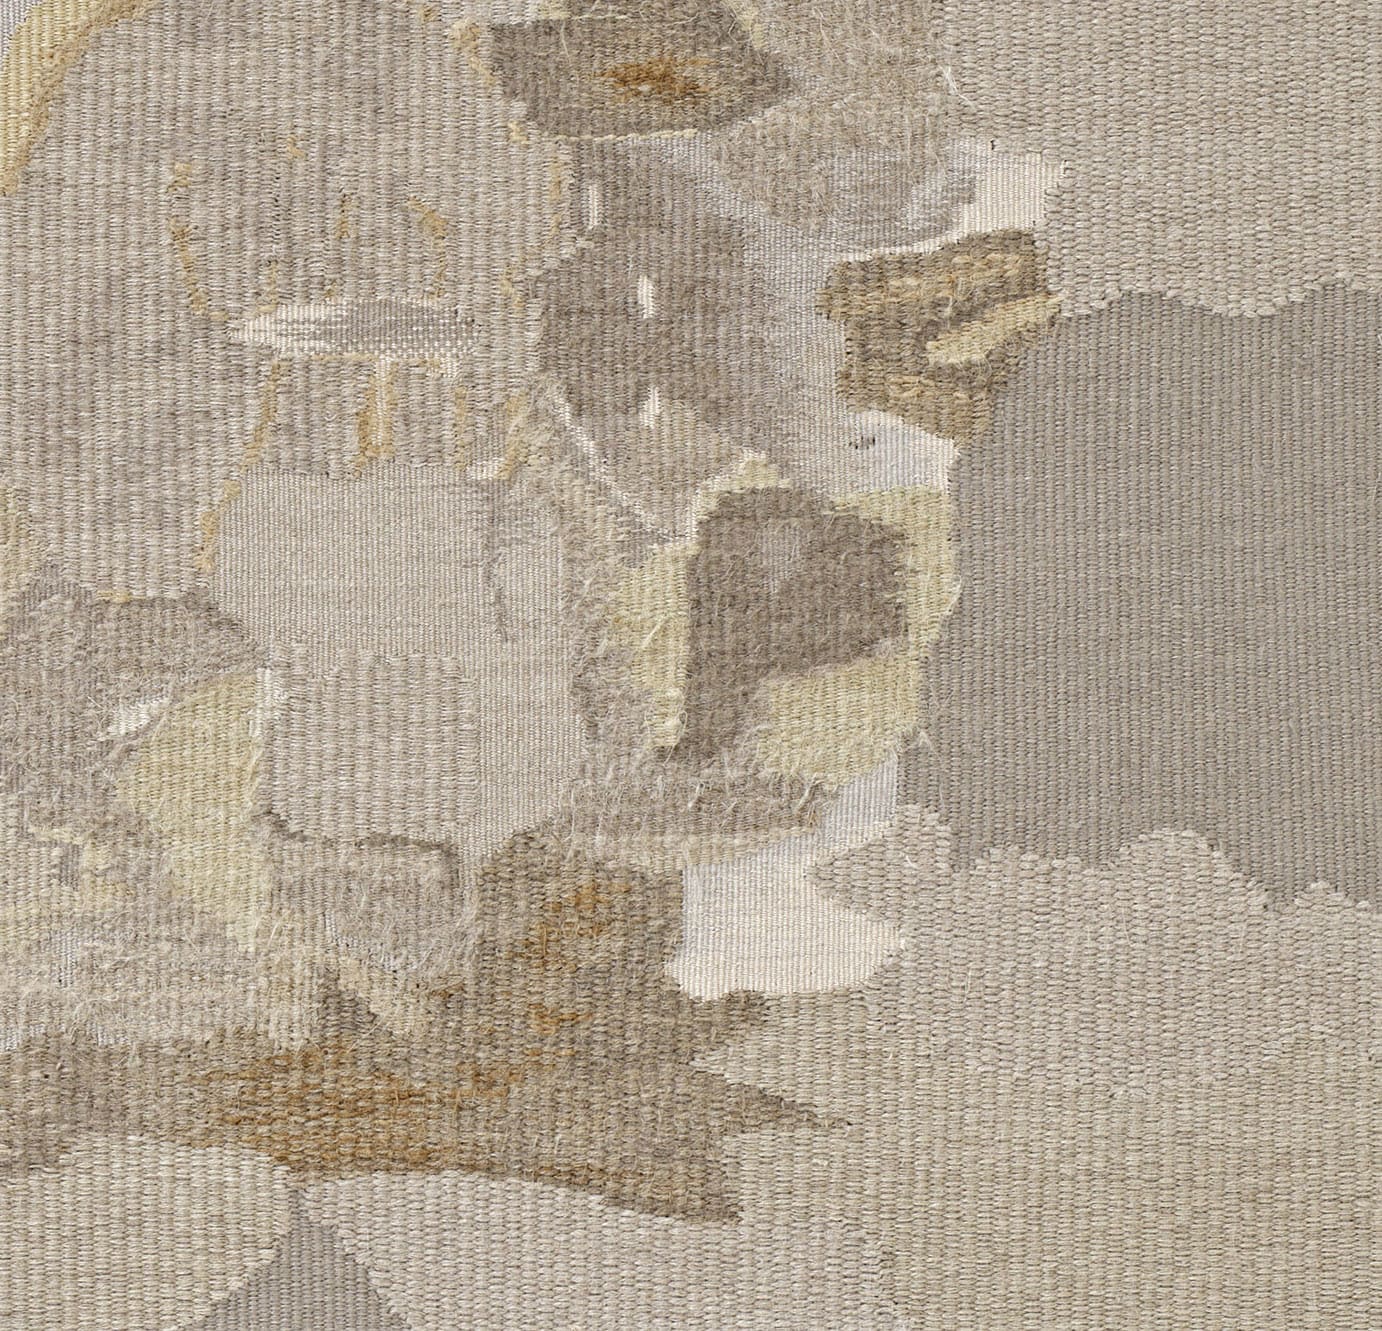 <p>Andreas Eriksson, <em>Weissensee No. 9</em>, 2018 - 2019. Detail.</p><h3>"Territories of the finished tapestries might be distinguished by a particular knotted texture or the stands of long fibre sprouting from the surface. Andreas has described the tapestries as ‘existential landscapes’. We might also see them as a conceptual extension of painting in which the picture migrates to the canvas itself." </h3><p><strong>- Hettie Judah on Andreas Eriksson, 2020</strong></p>